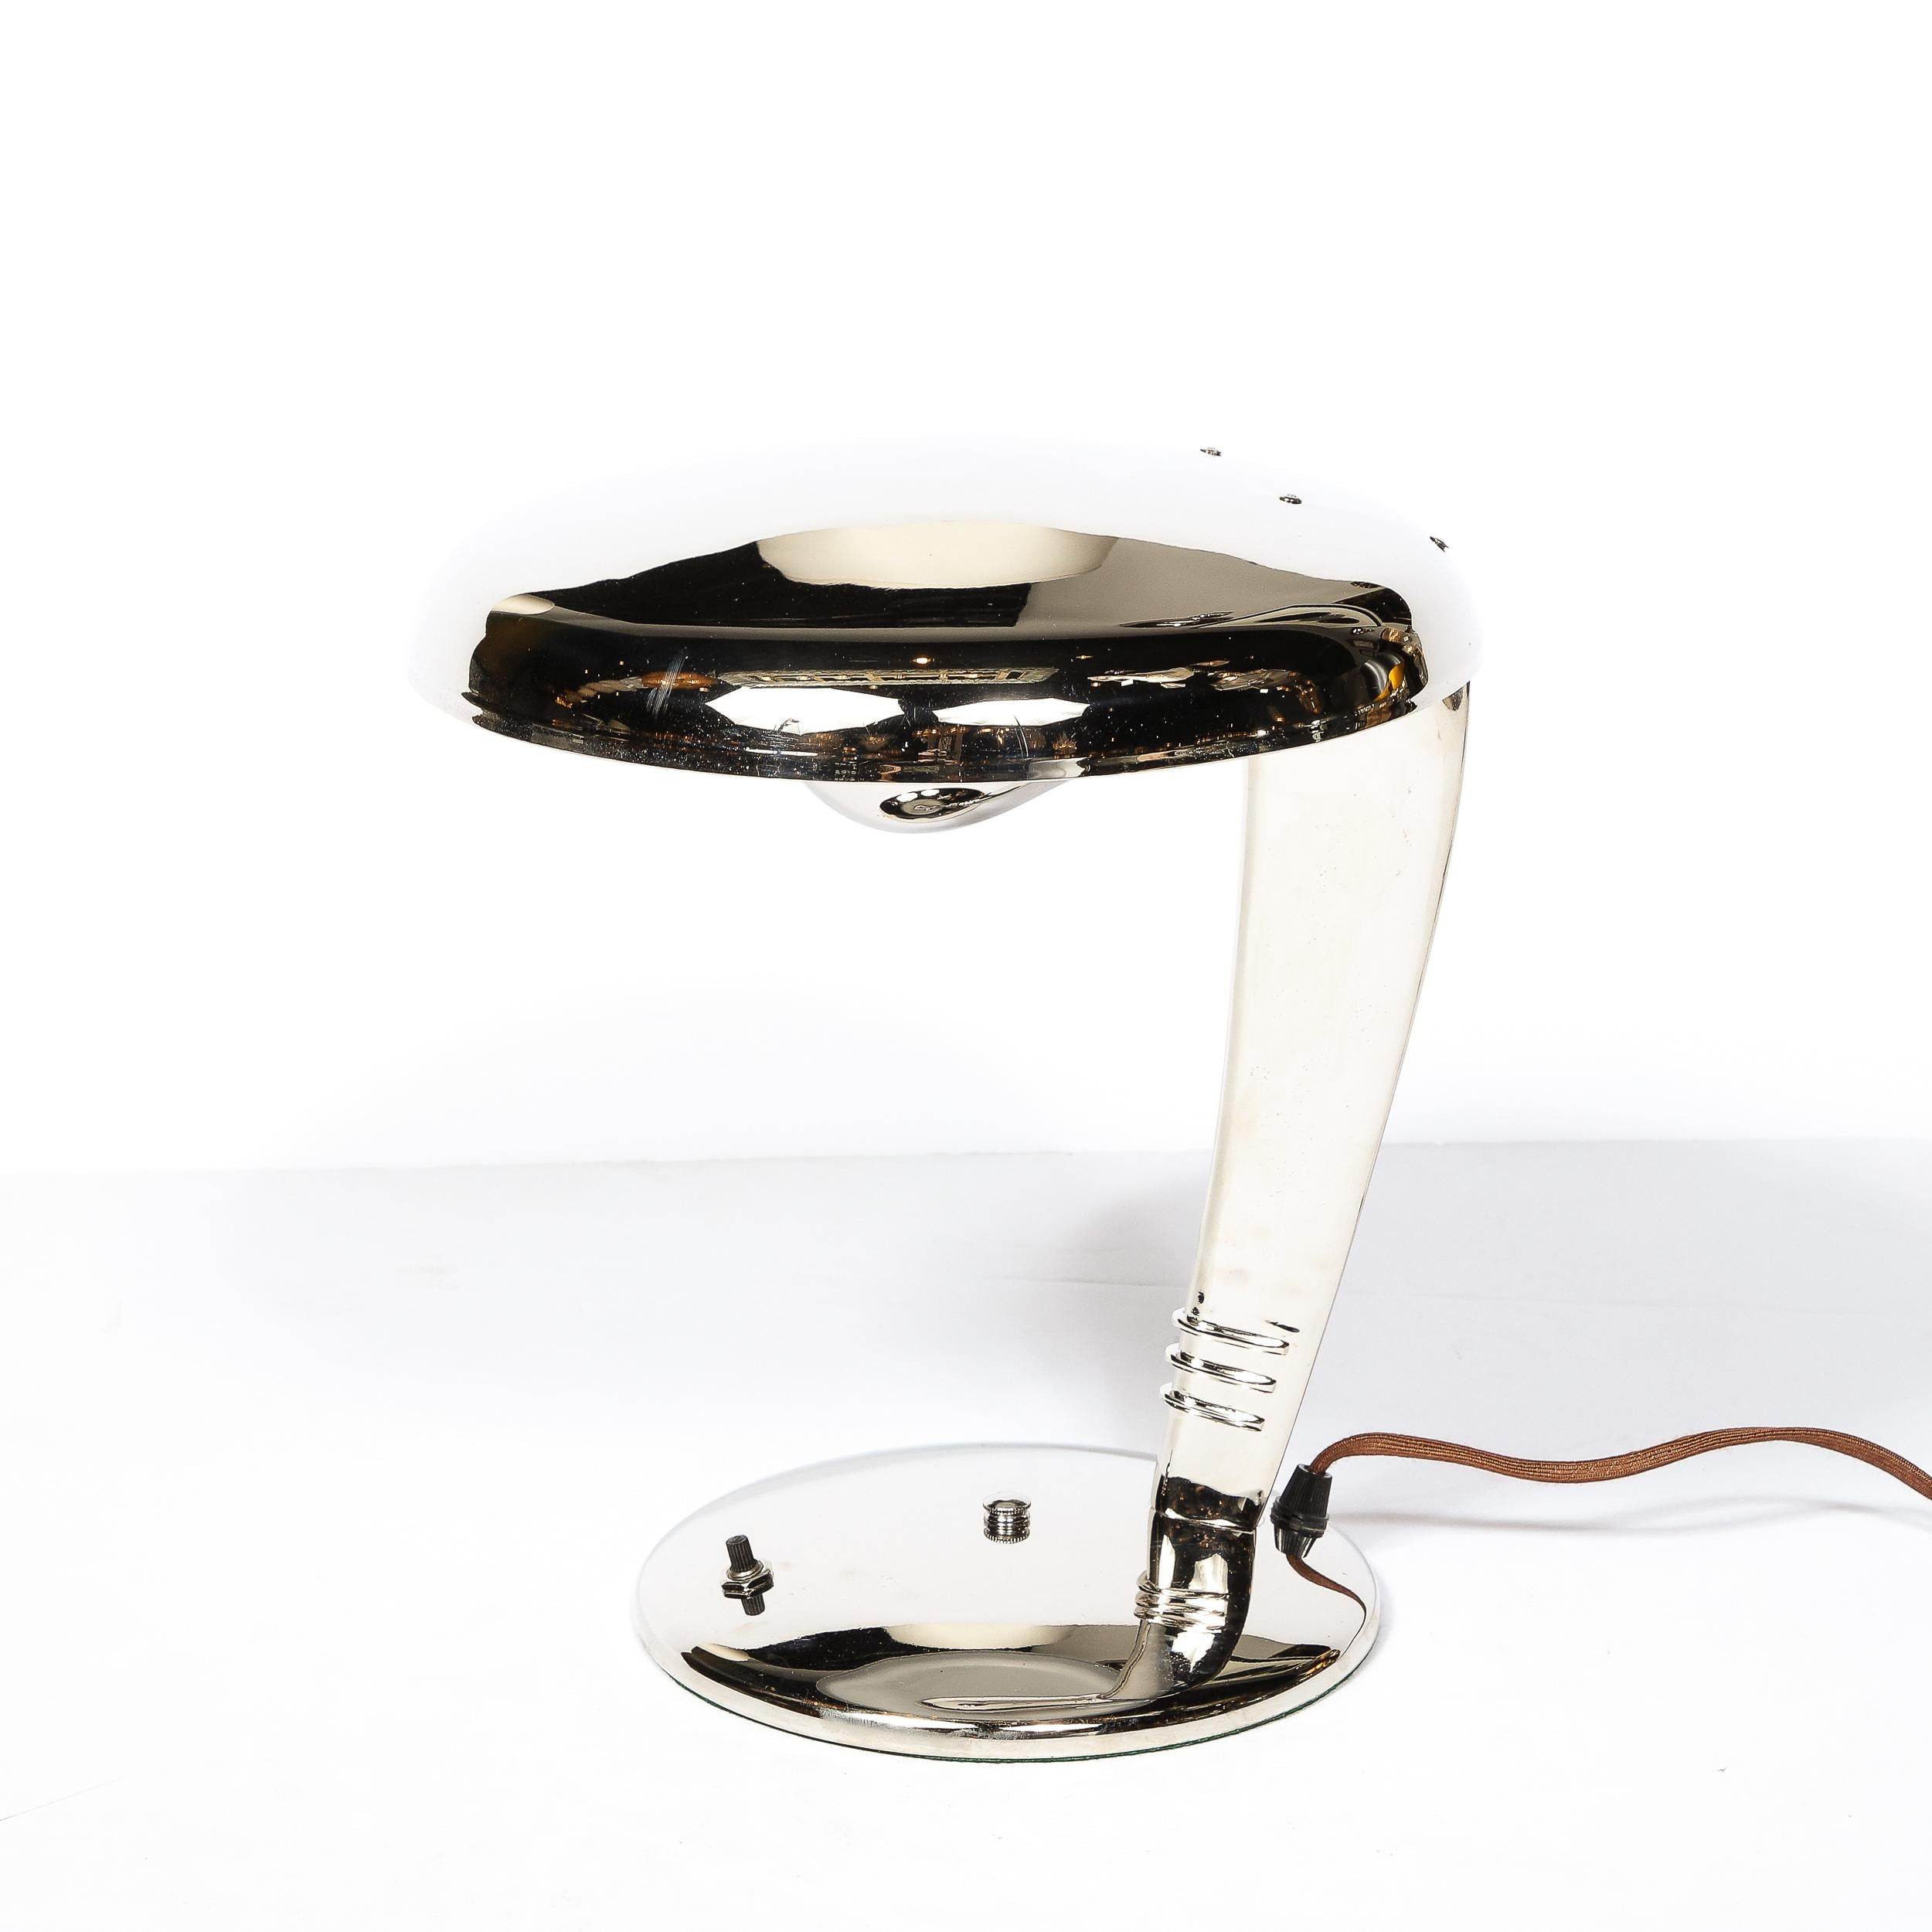 This Art Deco Cobra Table lamp originates from the United States Circa 1930 designed by Norman Bel Geddes for Fairies. A handsome example of Art Deco design and material beauty, this piece features a streamlined profile in Polished nickle with a